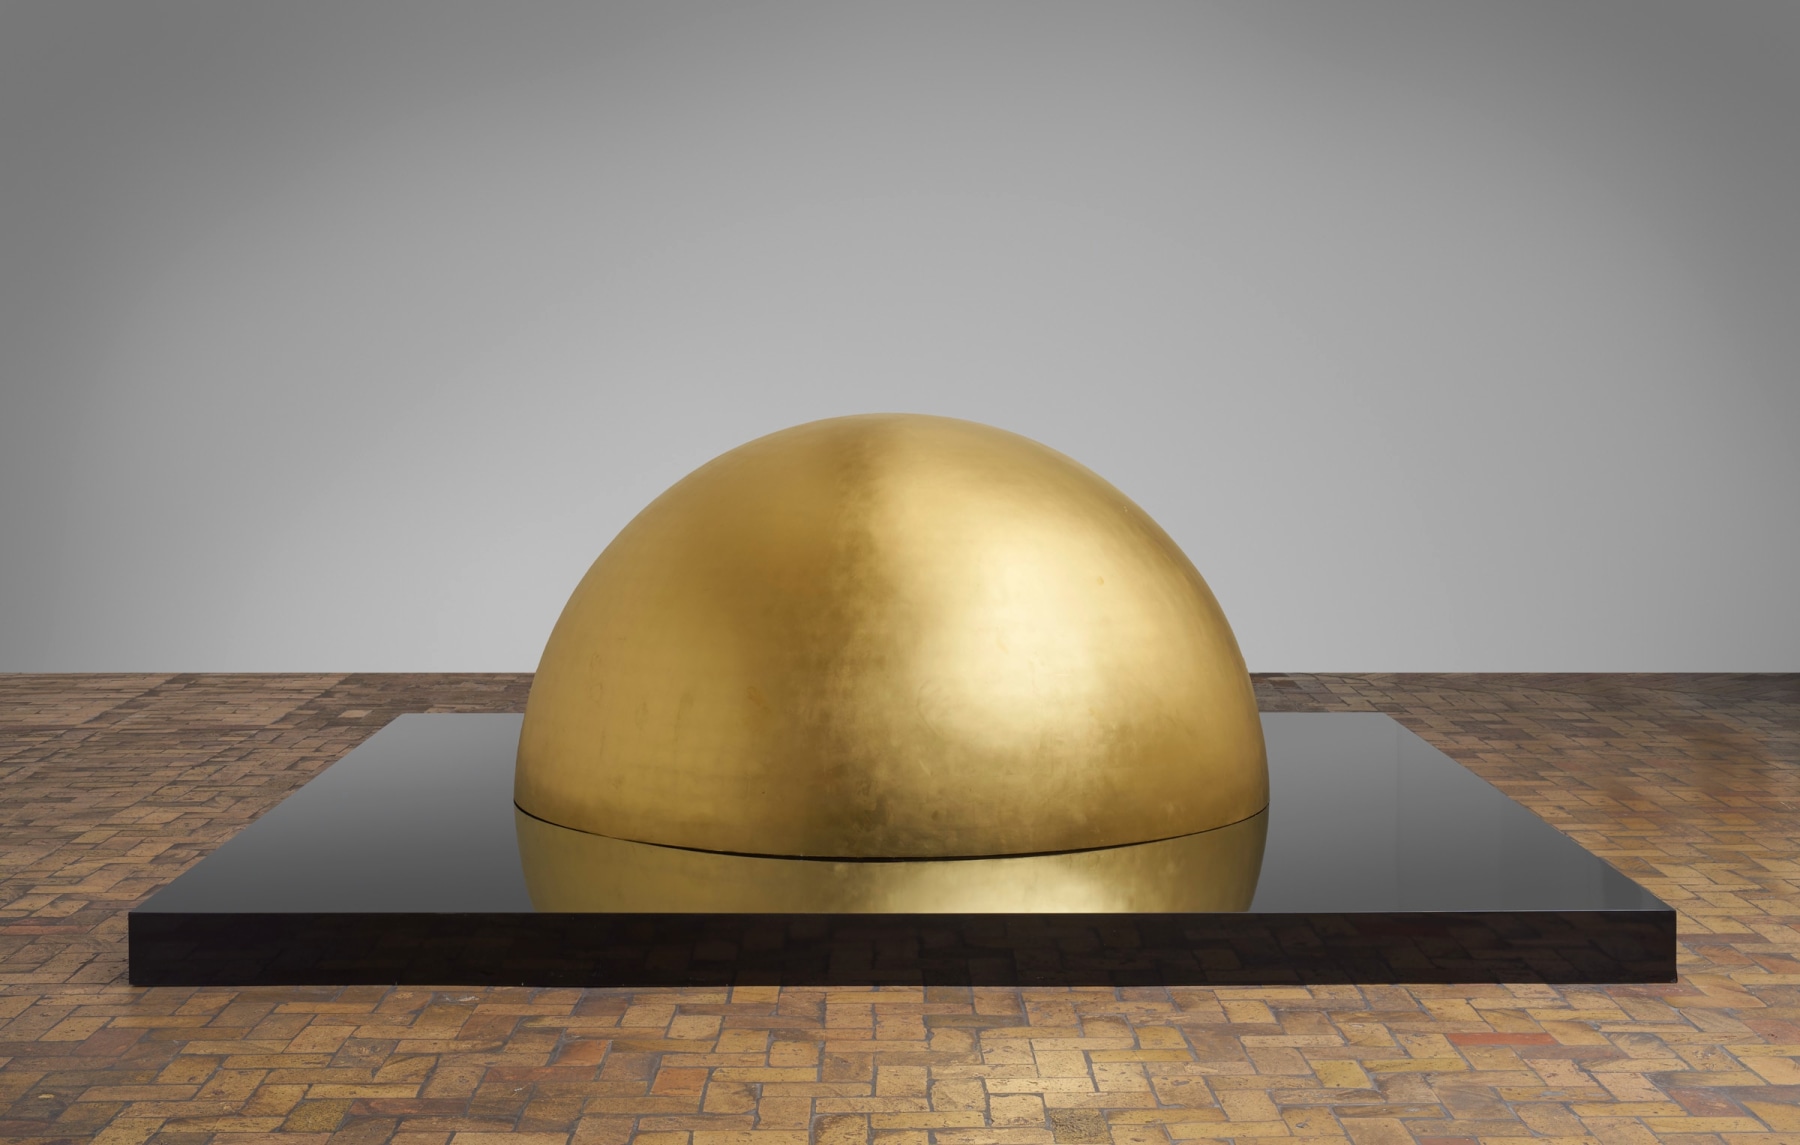 James Lee Byars

&amp;ldquo;The Capital of the Golden Tower&amp;rdquo;, 1991

Stainless steel, 24 karat gold, painted wood

Gilded steel:

49 1/4 x 98 1/2 x 98 1/2 inches

125 x 250 x 250 cm

Painted wood:

7 1/2 x 157 1/2 x 157 1/2 inches

19 x 400 x 400 cm

JB 125/A